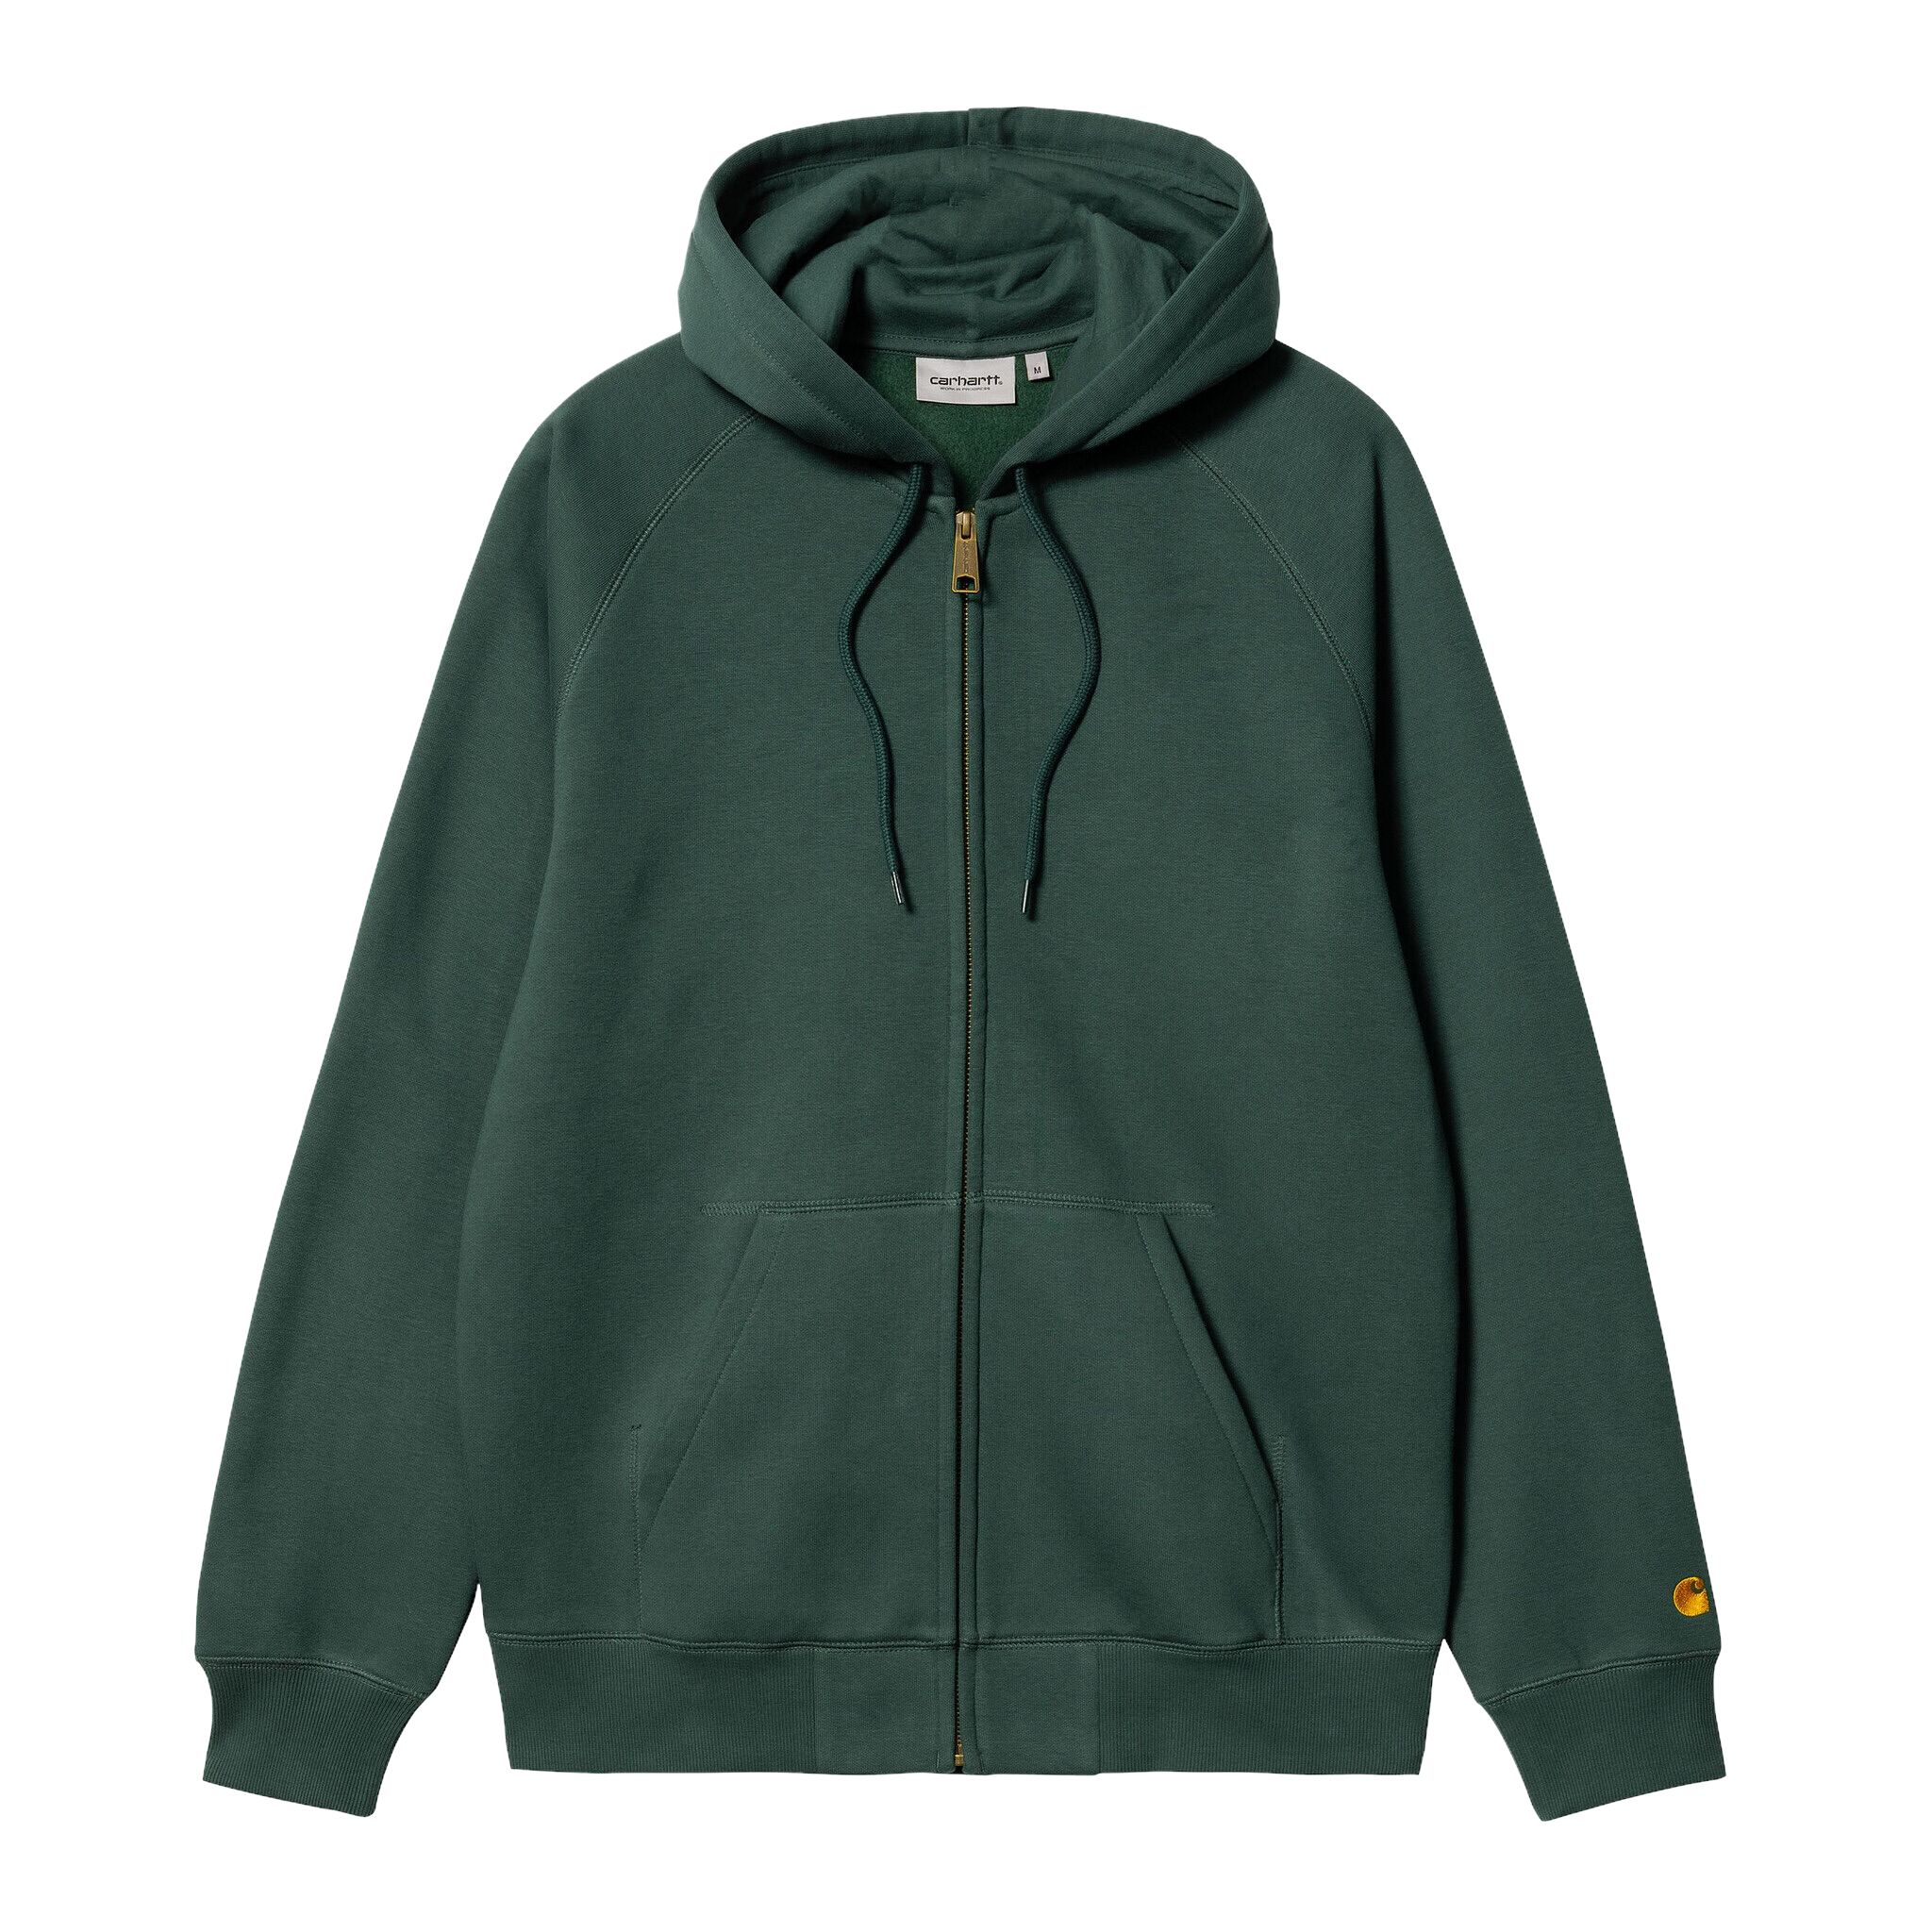 Carhartt WIP Hooded Chase Jacket - Discovery Green/Gold